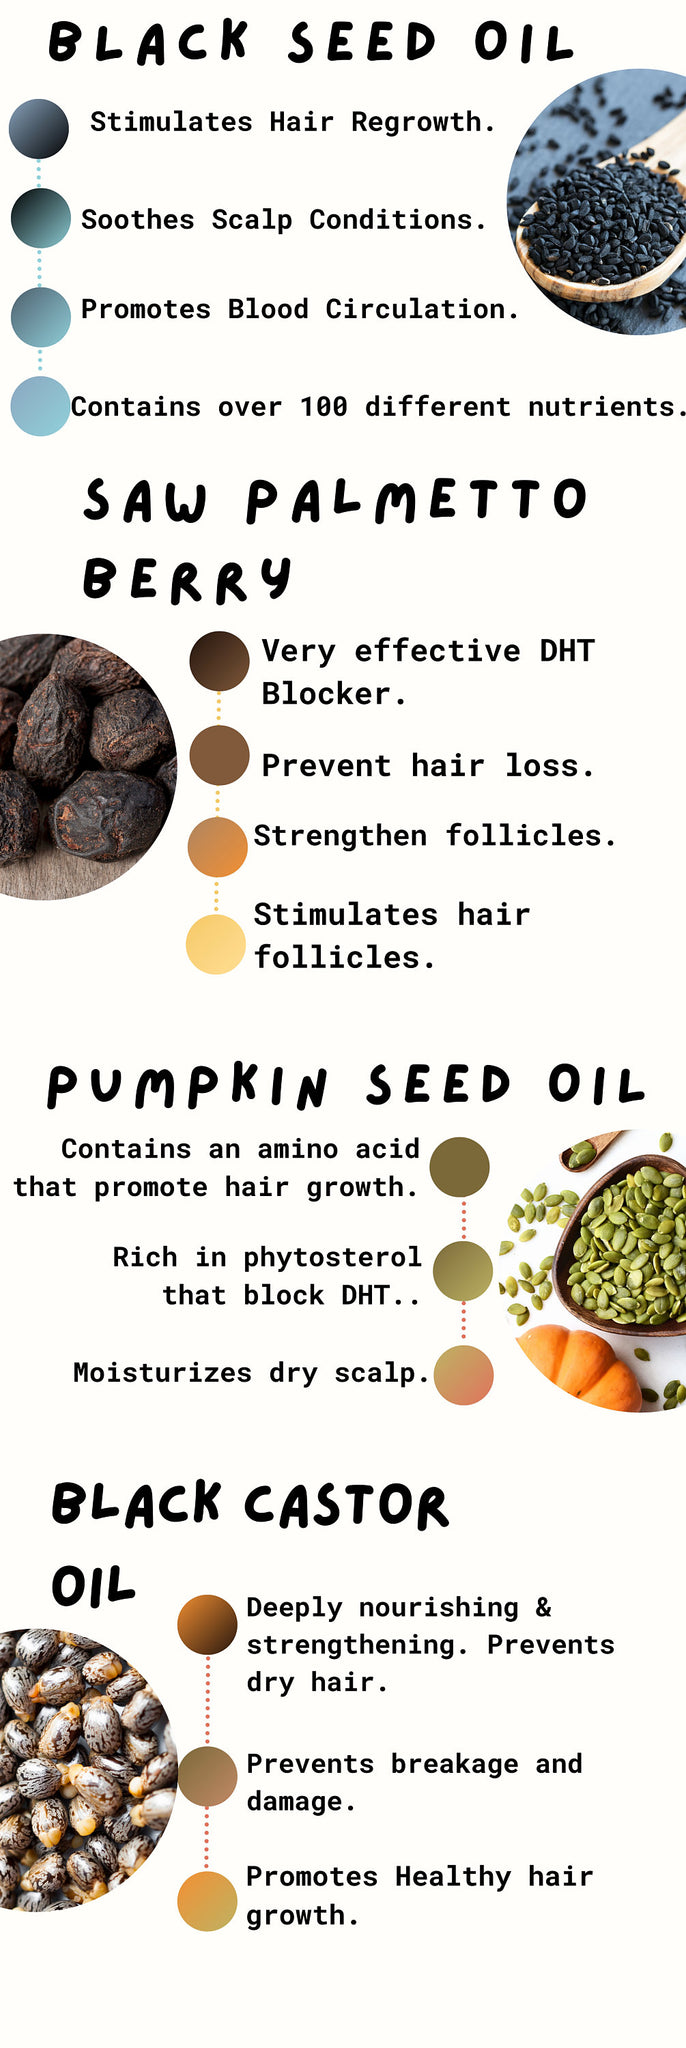 Black Castor Saw Palmetto Pumpkin Seed Black Seed Organic Concentrated Cold Pressed Hair Growth Booster & Scalp Treatment